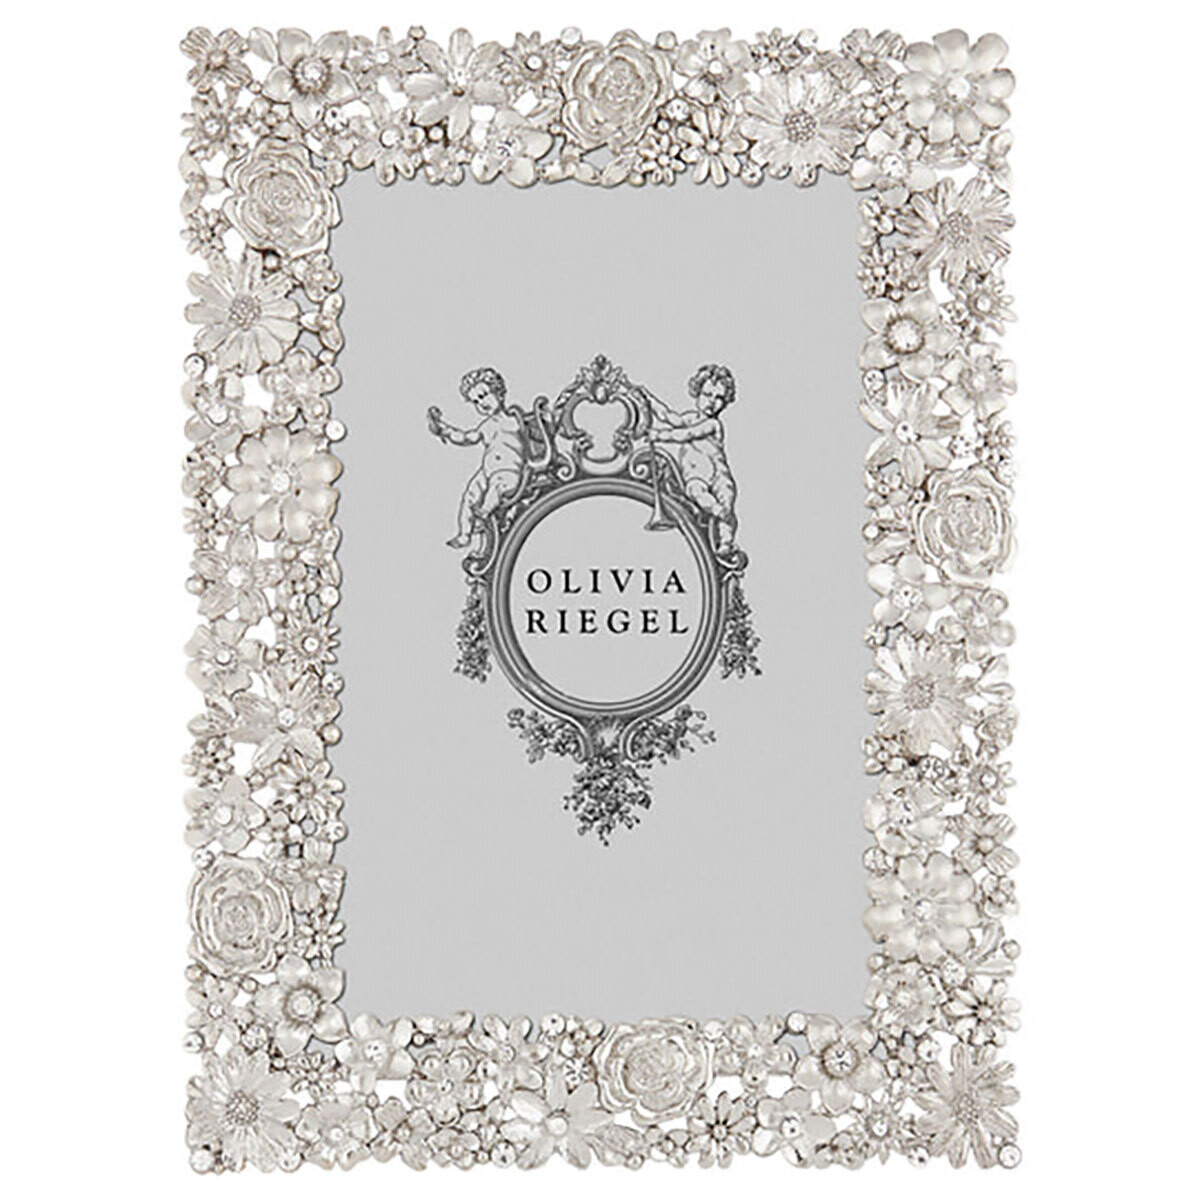 Olivia Riegel Silver Everleigh 4" x 6" Picture Frame RT4516